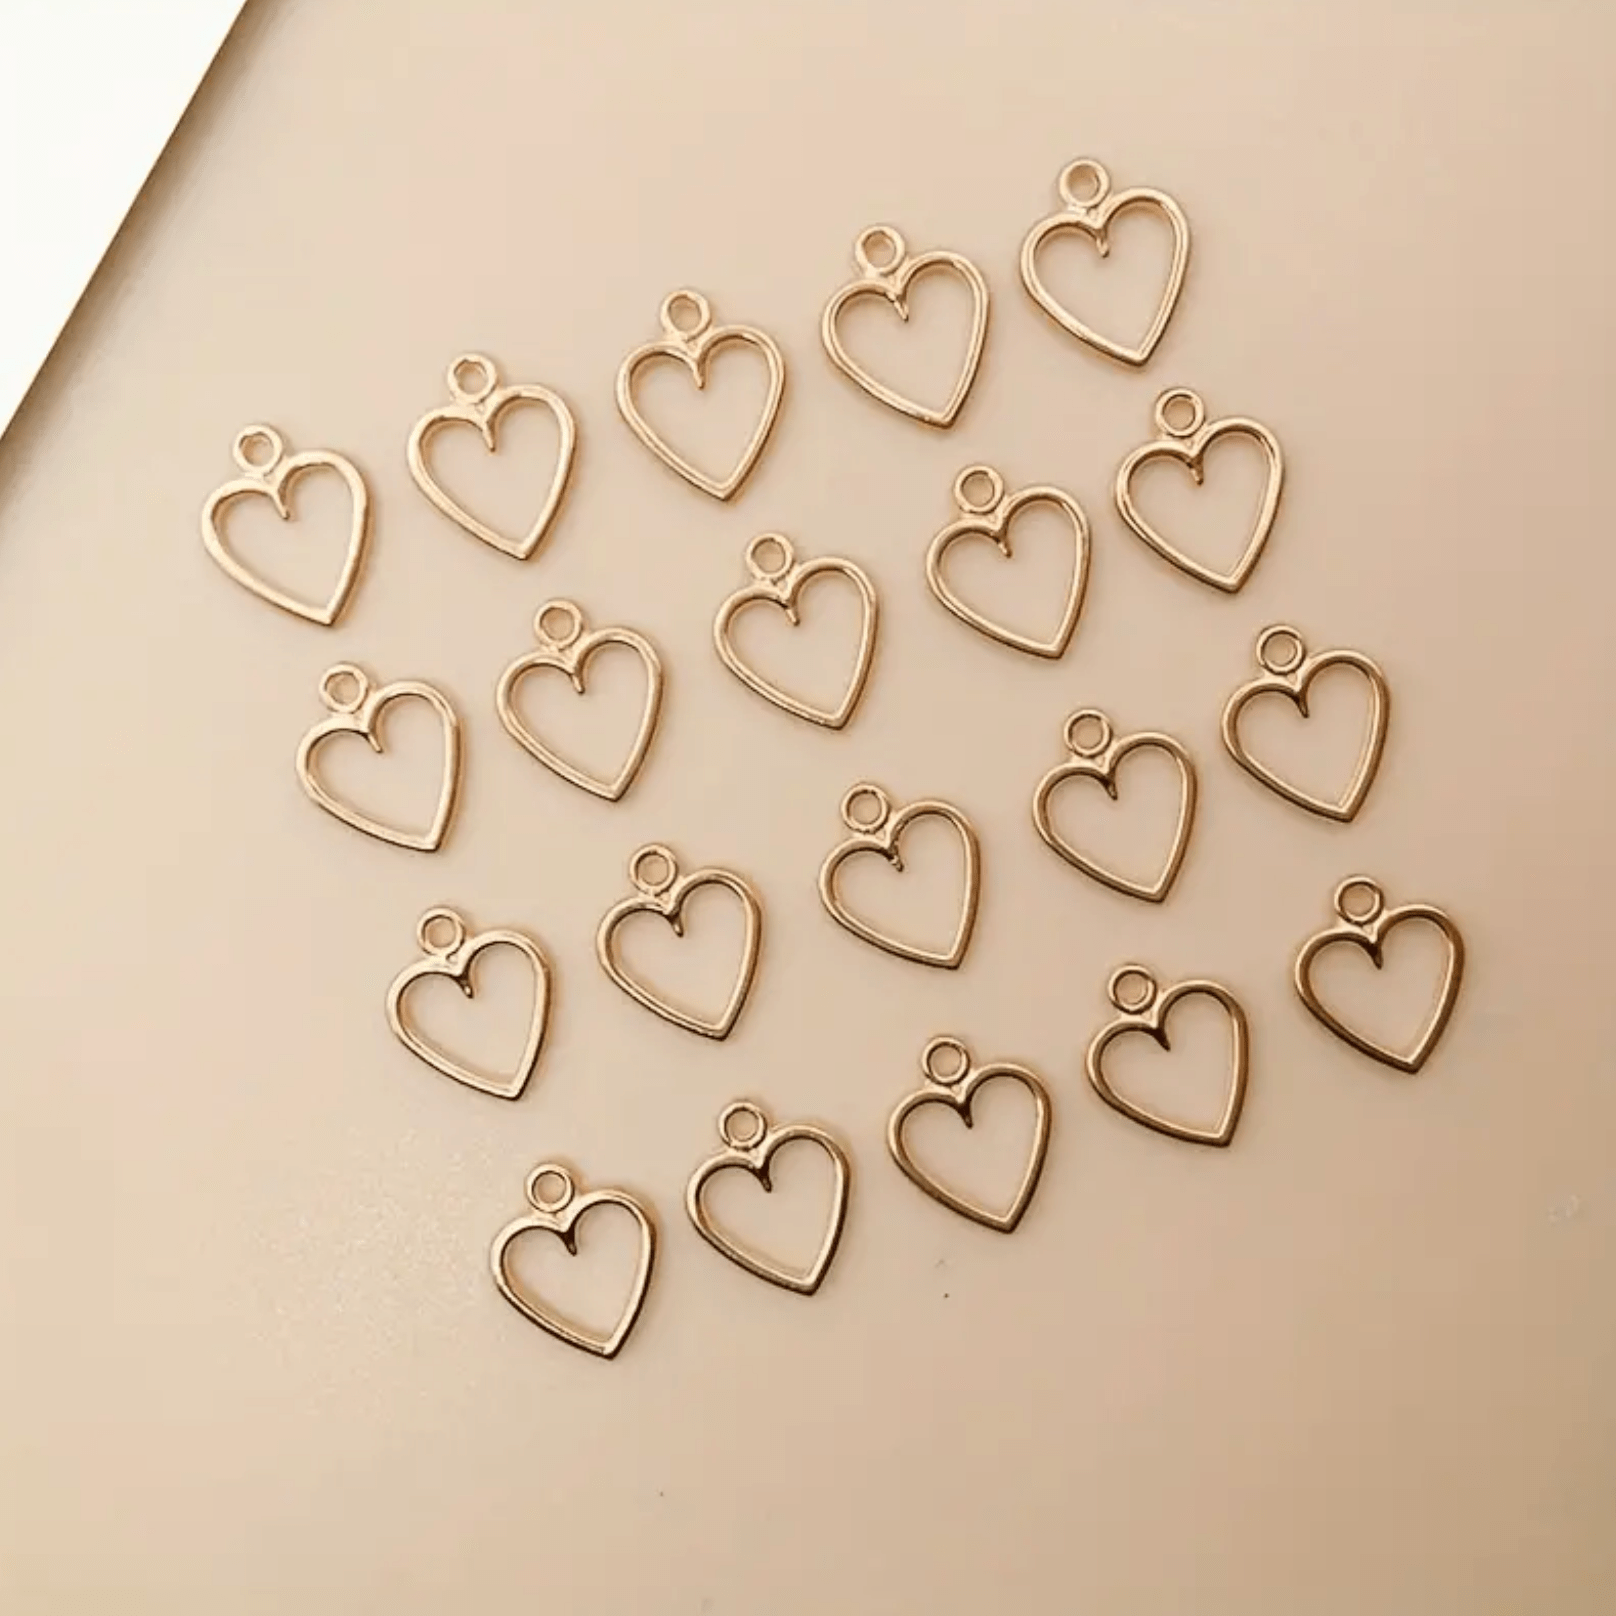 14mm Gold Heart Shaped Charm. Connector Earrings Basics (Sold in Pair) Earring Findings